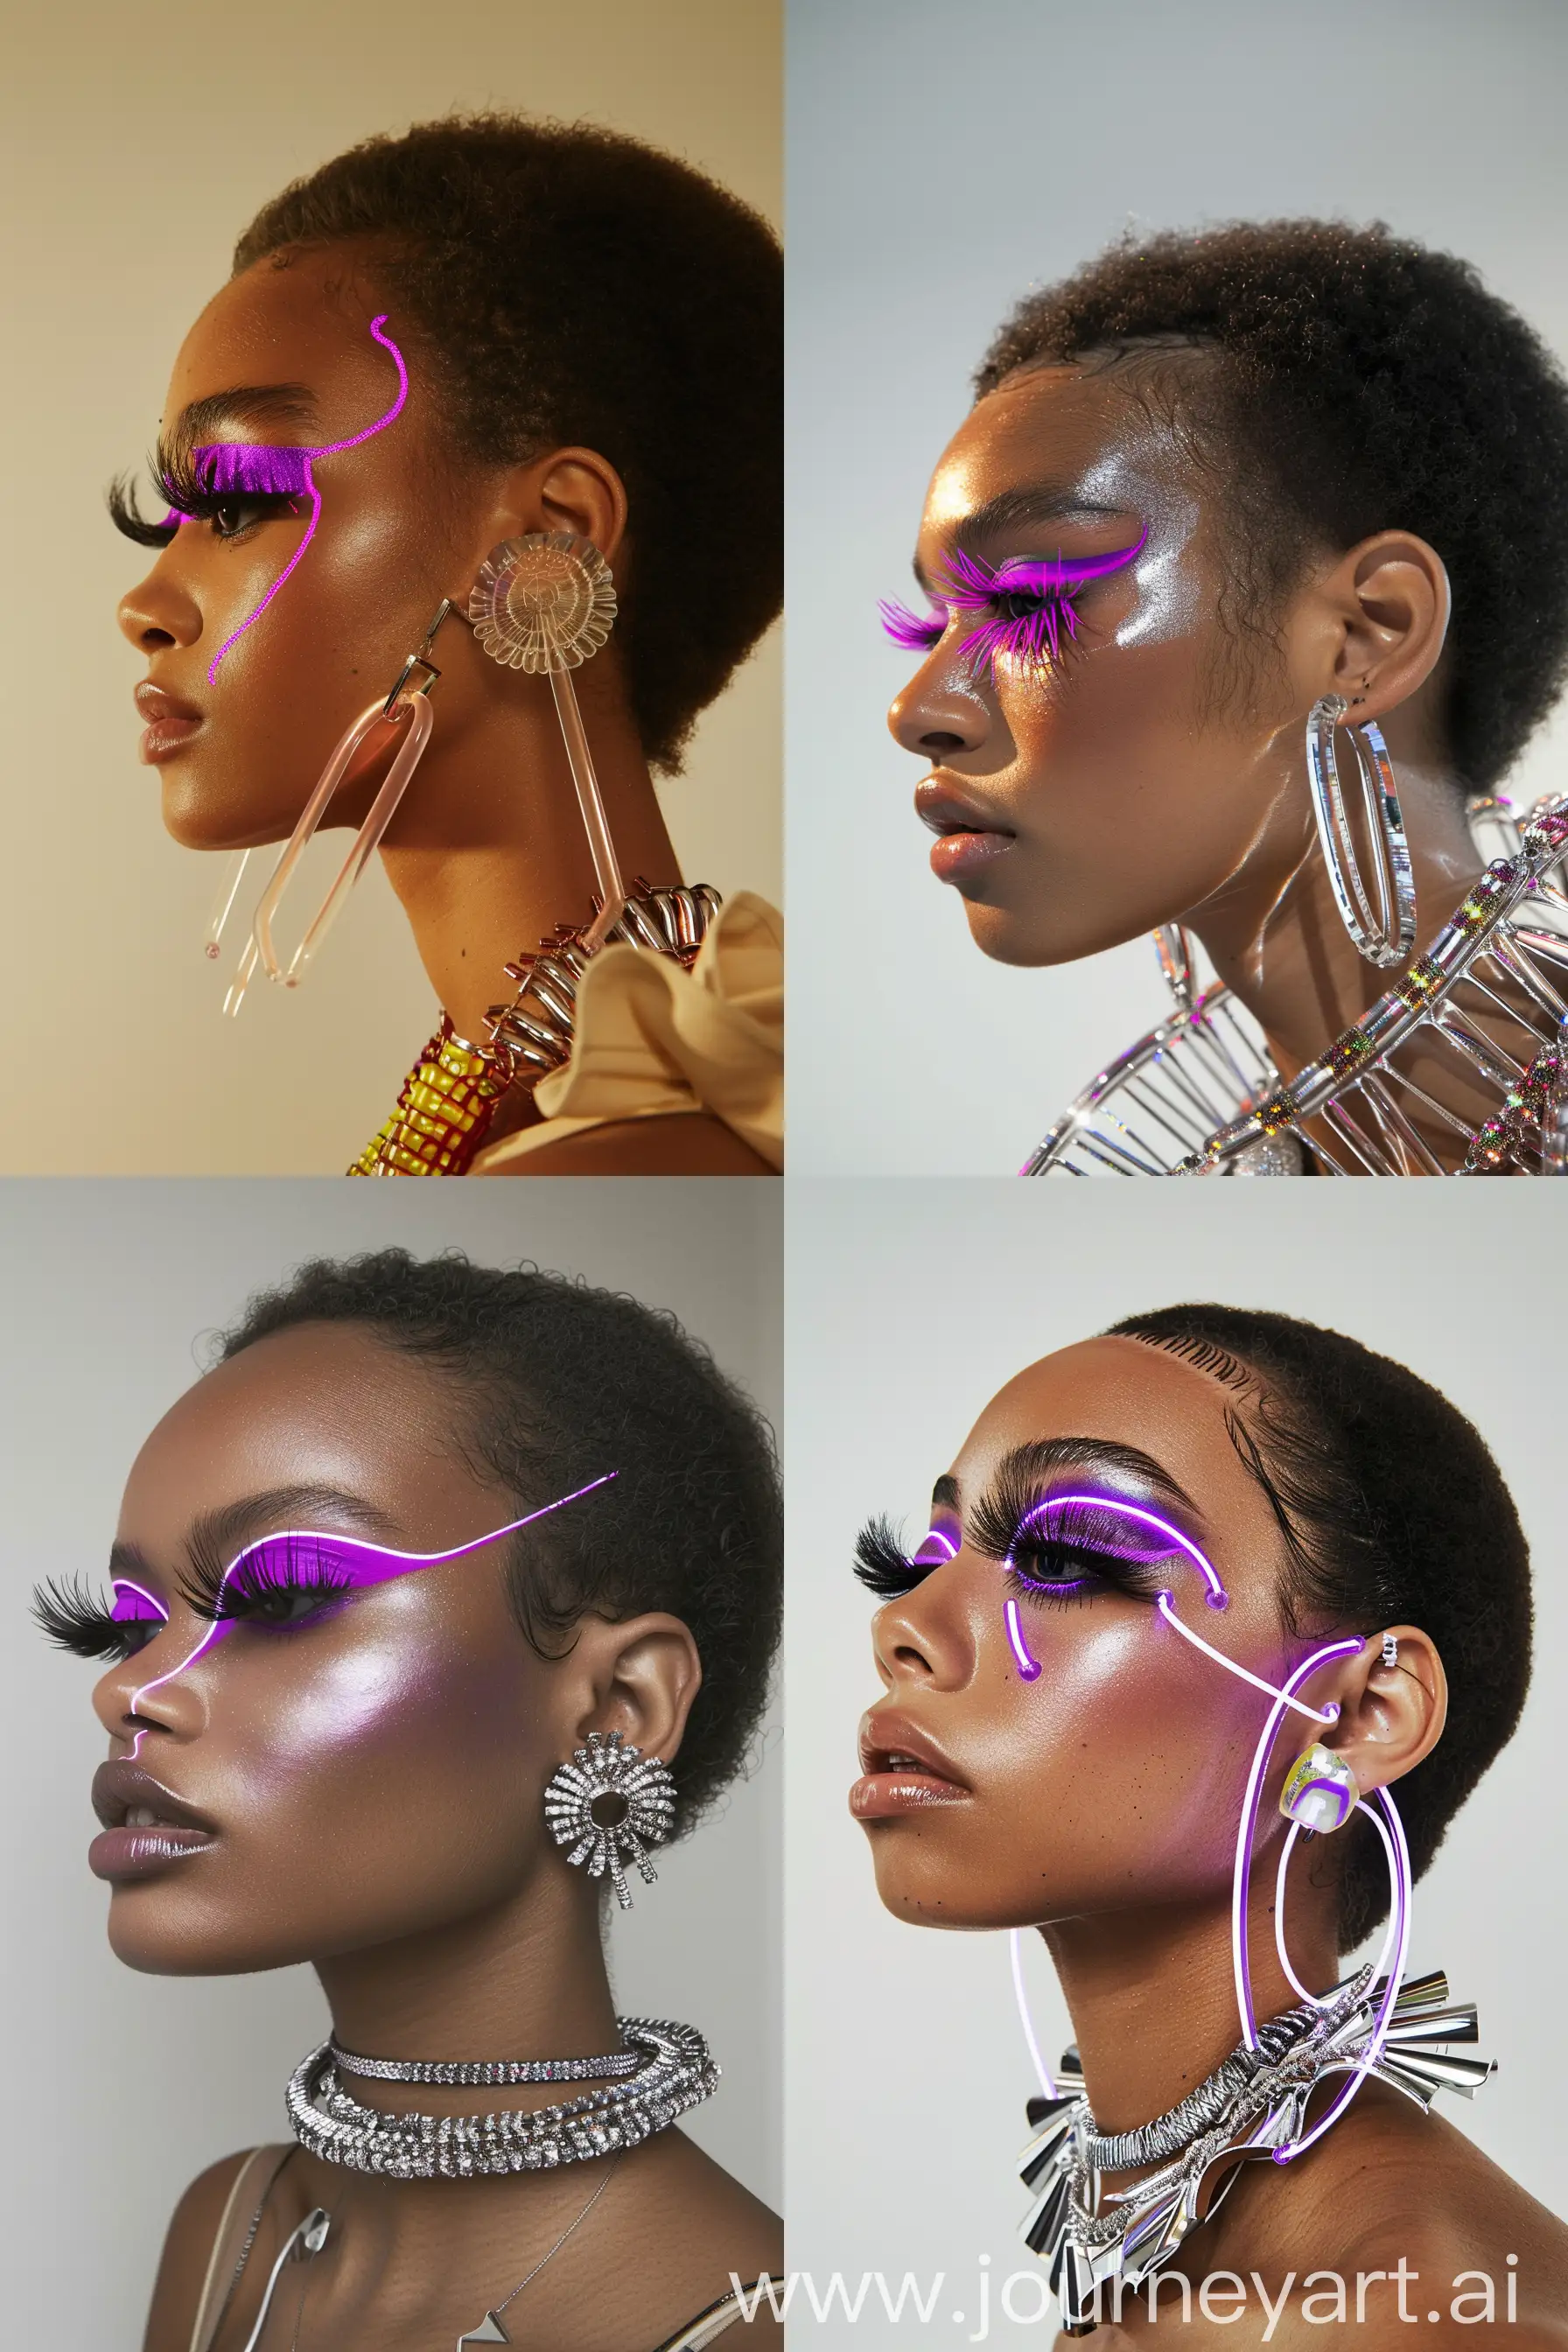 Model-with-Thick-Eyelashes-and-Neon-Purple-Eye-Makeup-Wearing-Statement-Necklace-and-Earrings